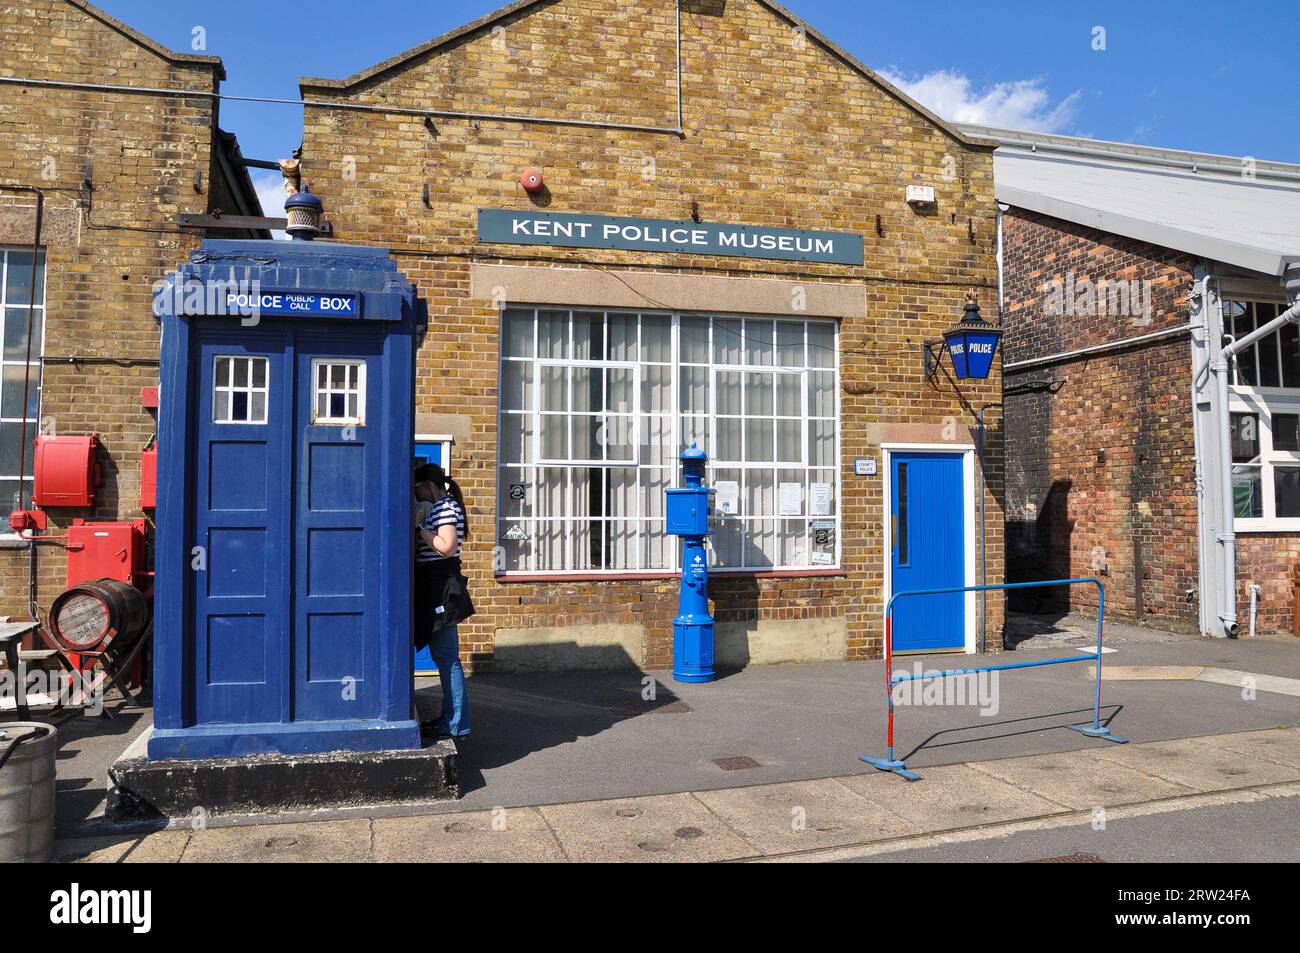 Kent Police Museum at The Historic Dockyard Chatham, Kent, UK. Kent County Constabulary history, with police box, public call box on display Stock Photo